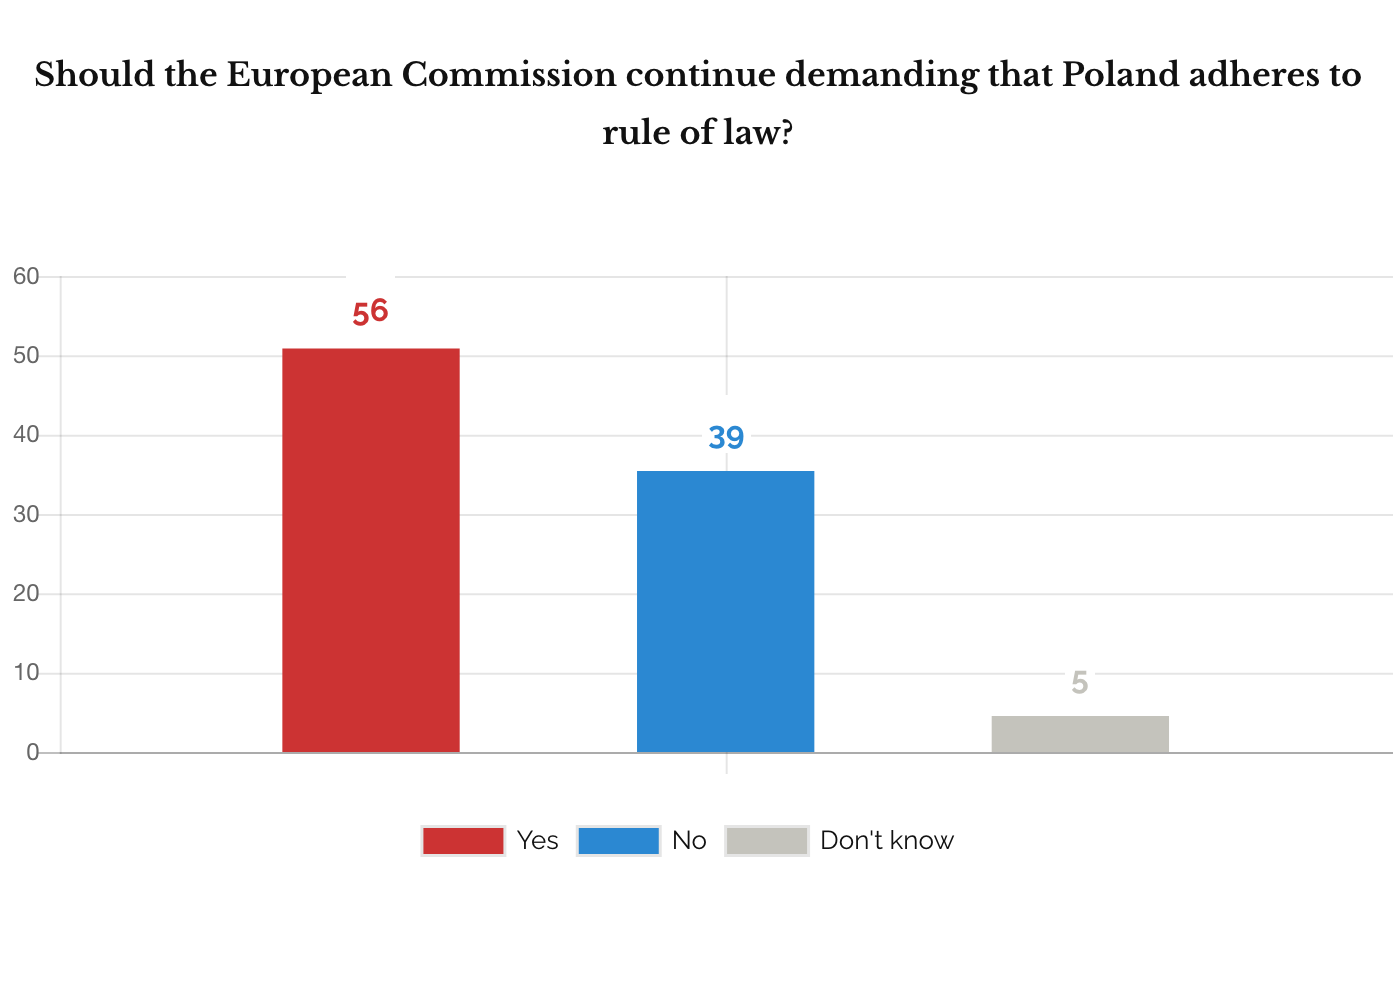 IPSOS December 2018. Support for the European Commission action concerning rule of law in Poland